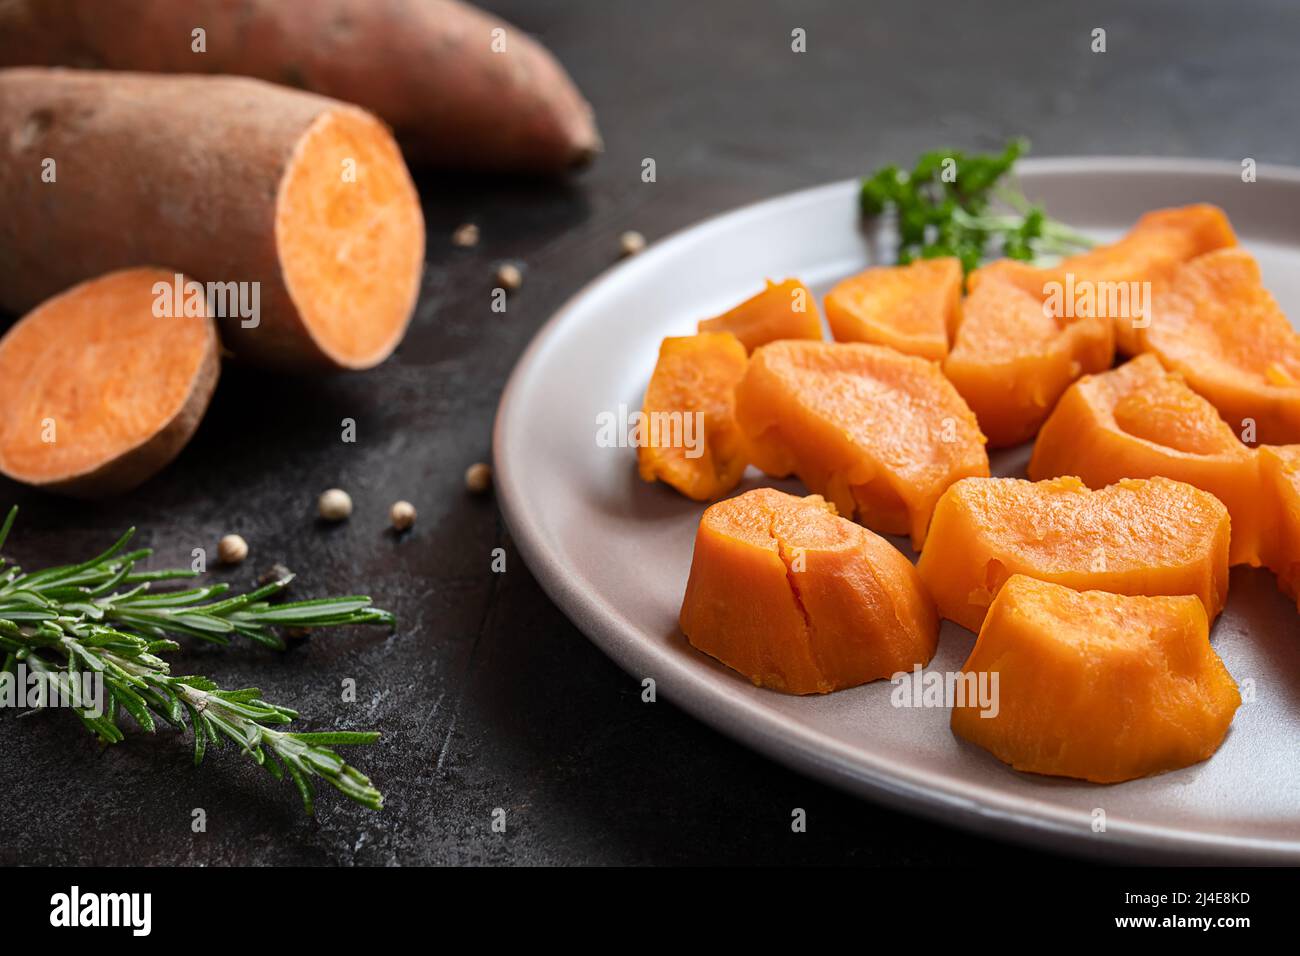 Roasted sweet potatoes and raw yam on a dark table close-up, plant based dining concept Stock Photo